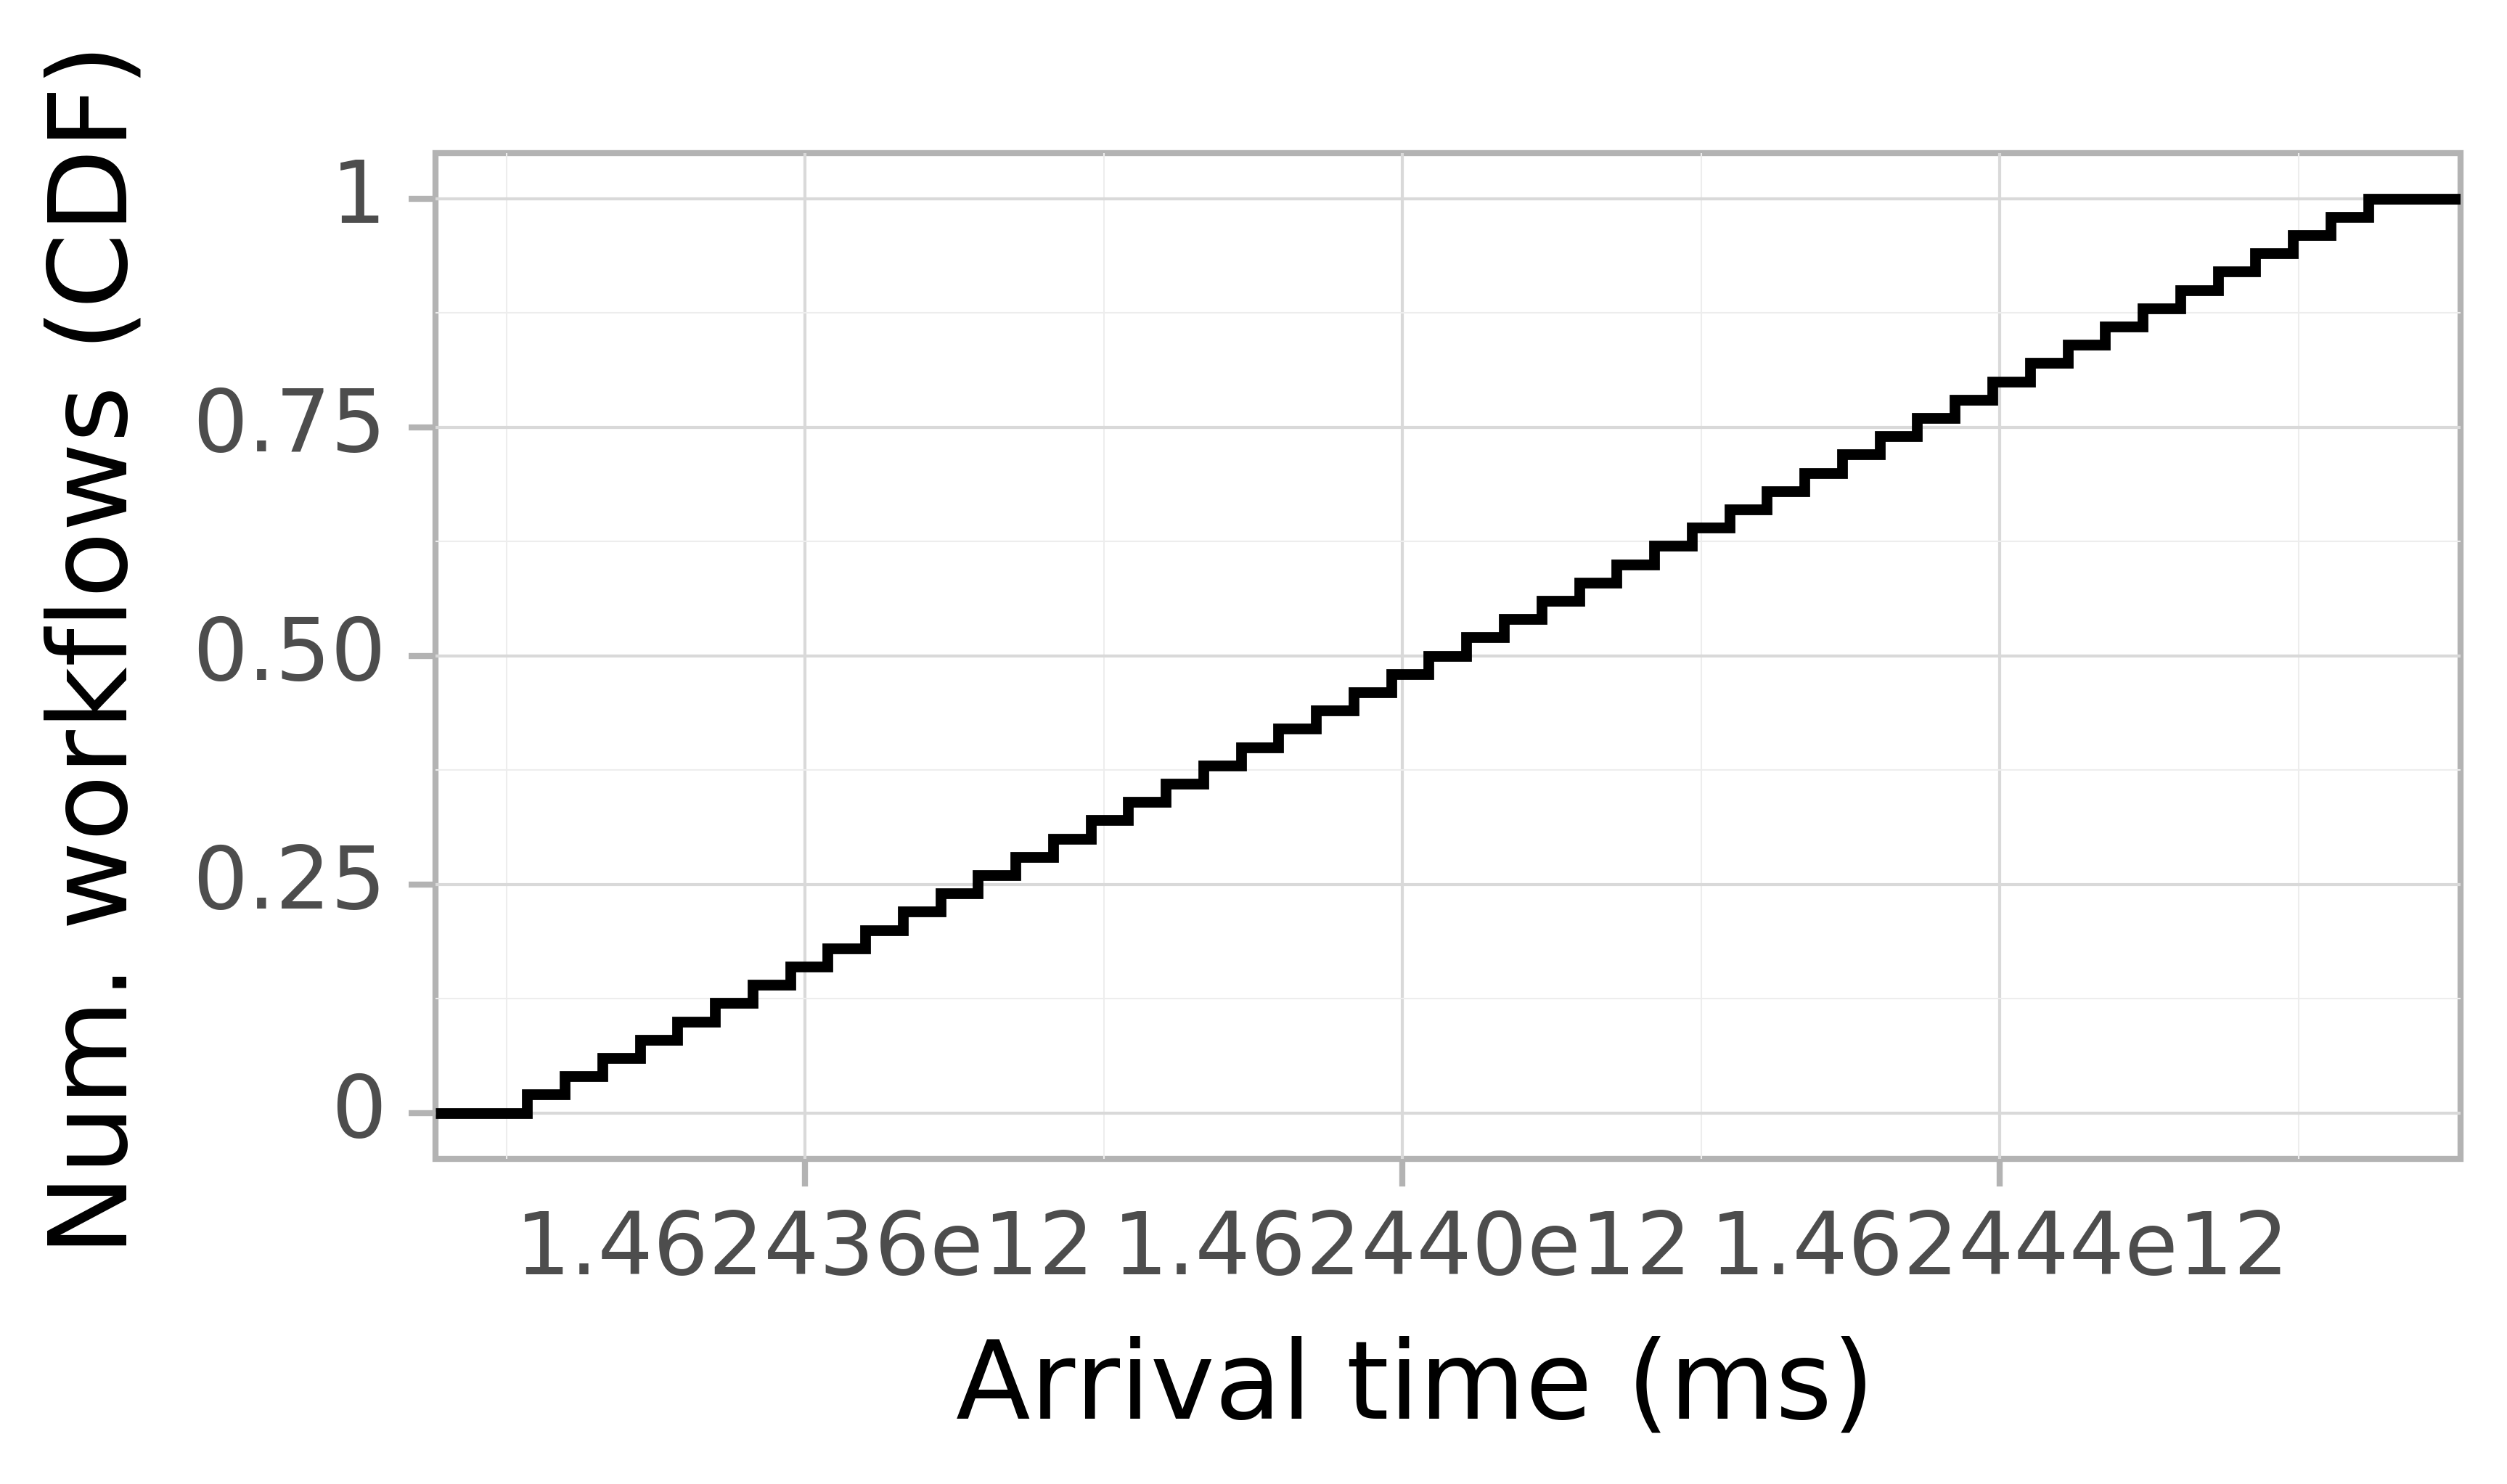 Job arrival CDF graph for the askalon-new_ee45 trace.